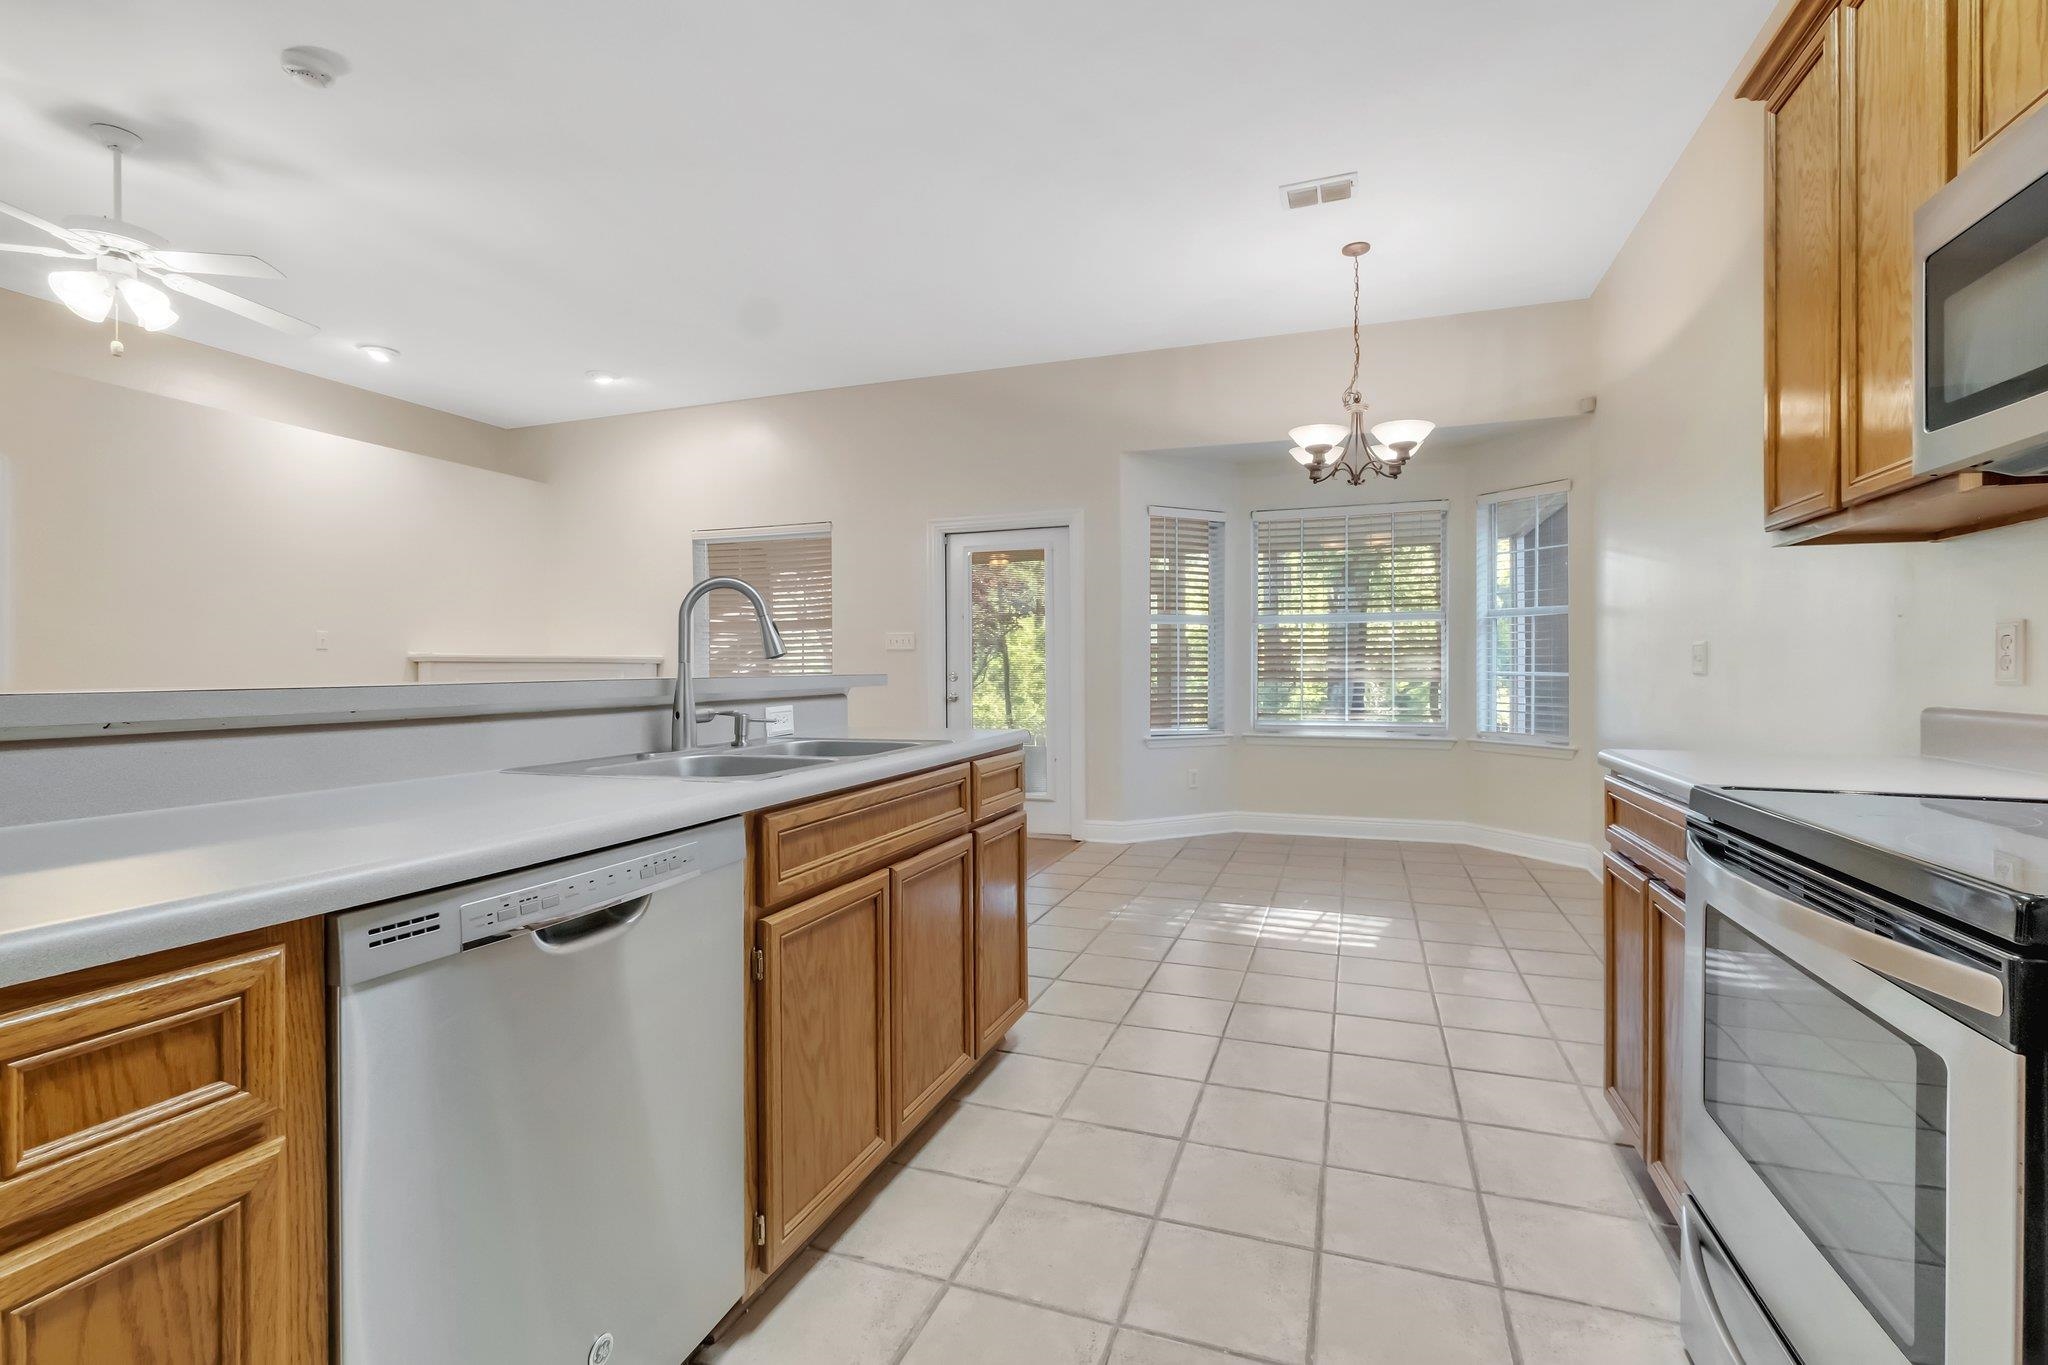 1043 Park View Drive,TALLAHASSEE,Florida 32311,3 Bedrooms Bedrooms,2 BathroomsBathrooms,Detached single family,1043 Park View Drive,370305